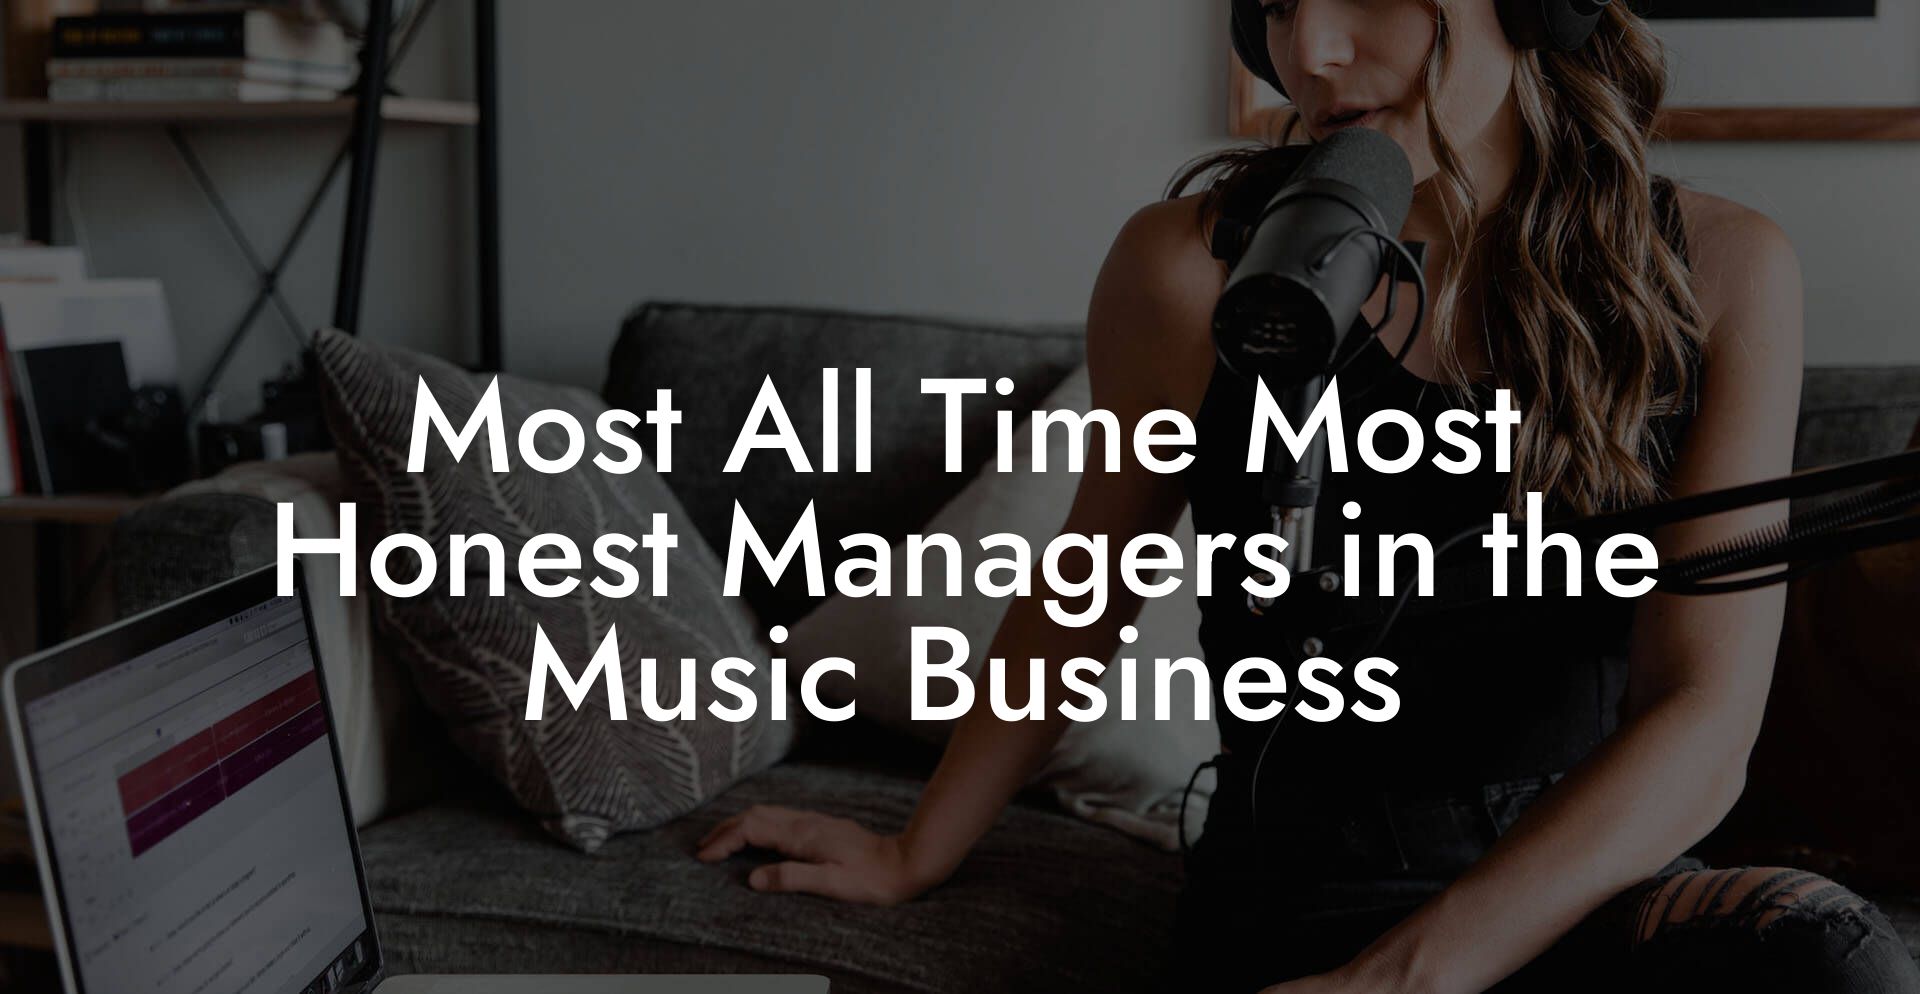 Most All Time Most Honest Managers in the Music Business